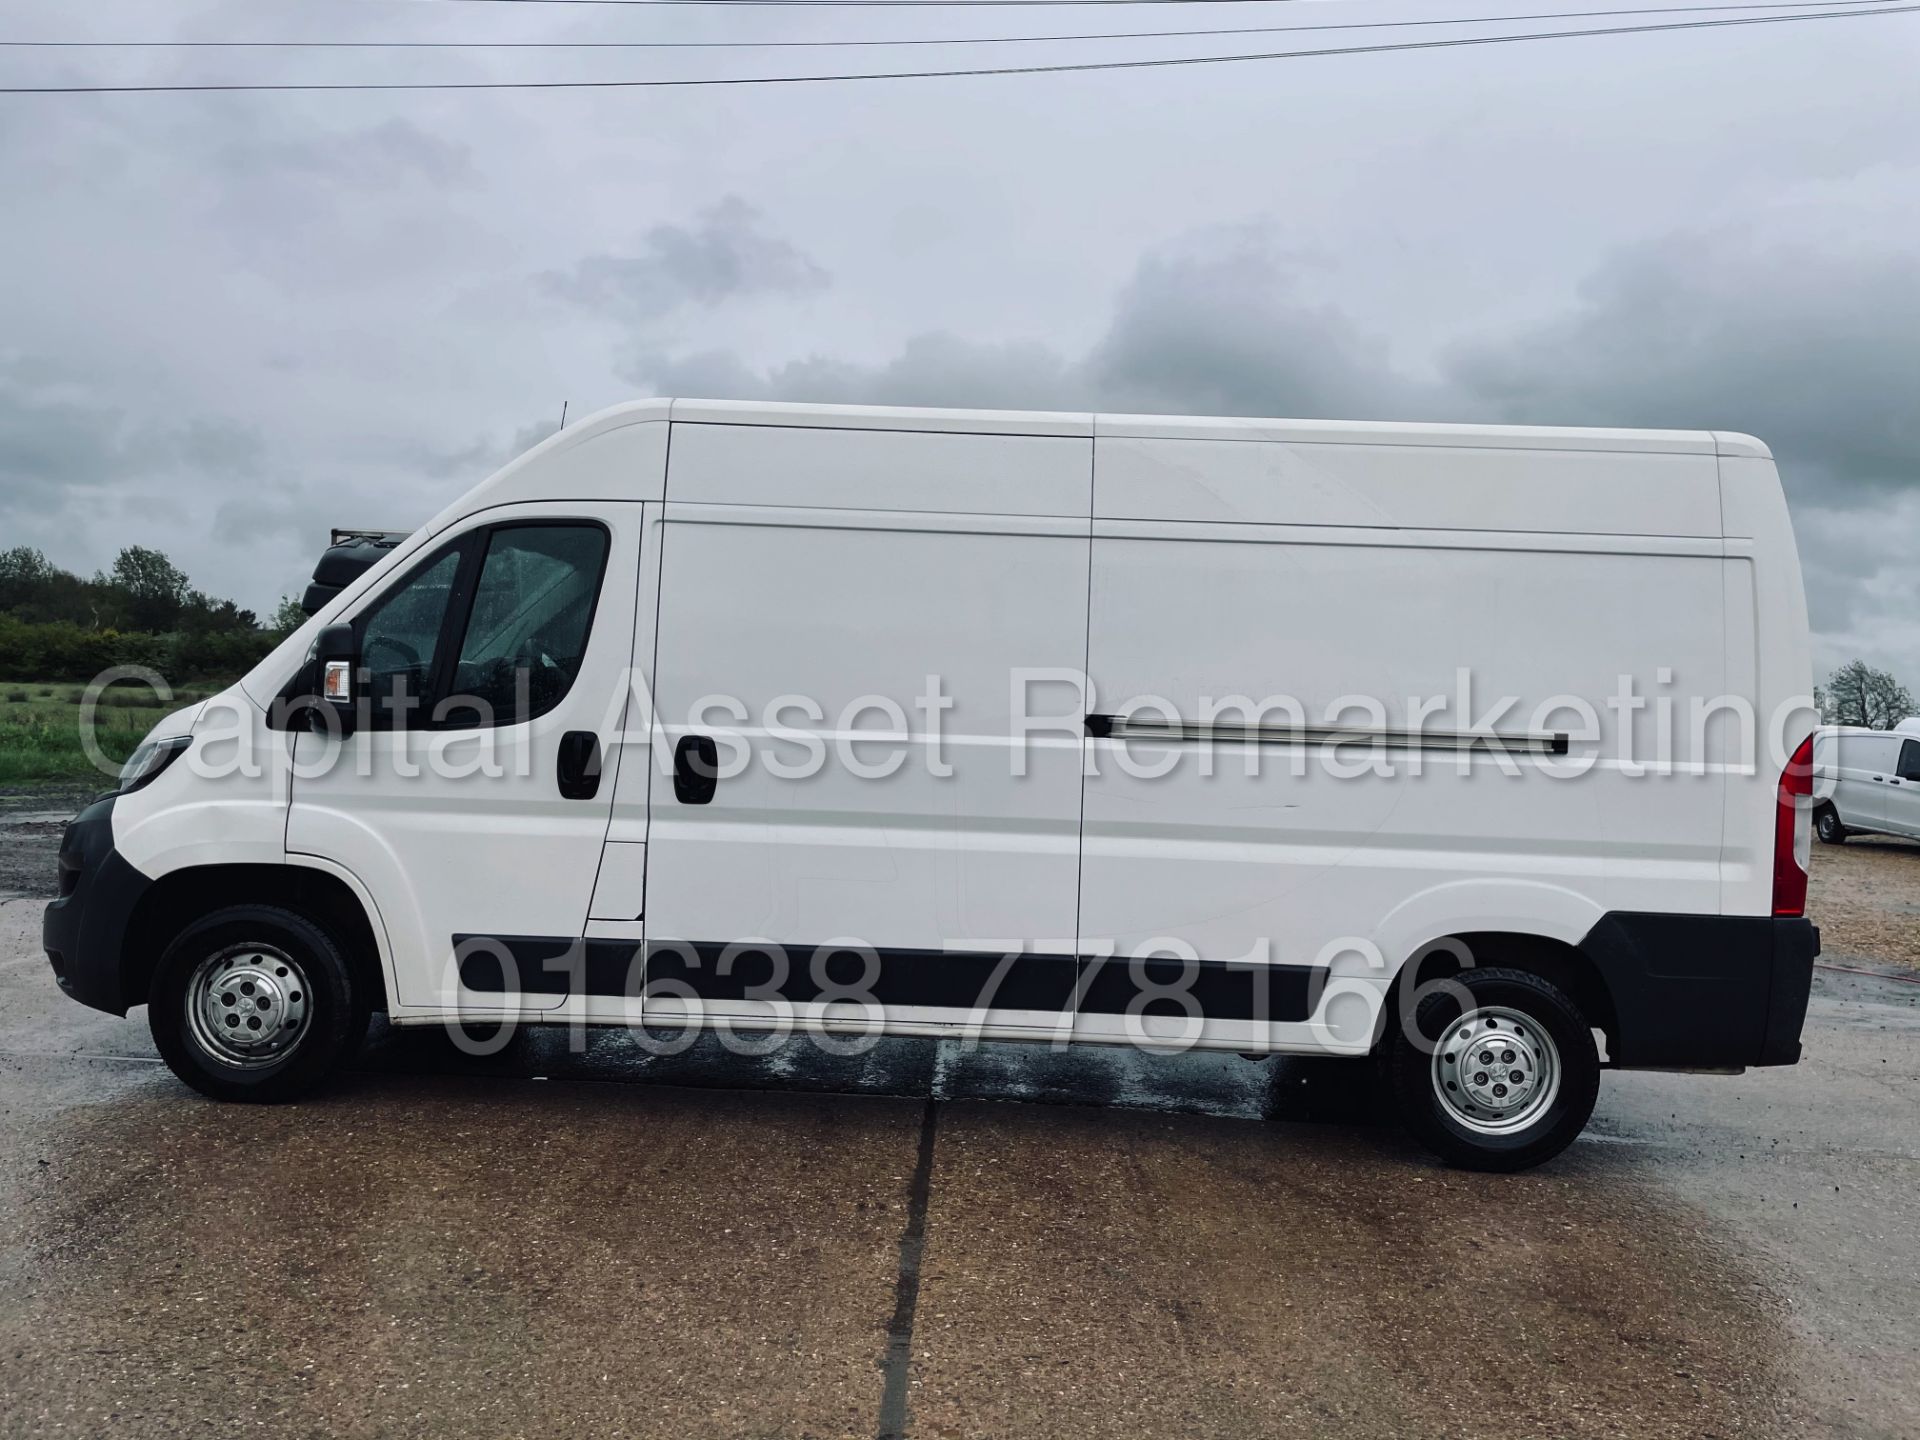 (On Sale) PEUGEOT BOXER 335 *PROFESSIONAL* LWB HI-ROOF (2016) '2.2 HDI - 6 SPEED' *A/C* (1 OWNER) - Image 8 of 41